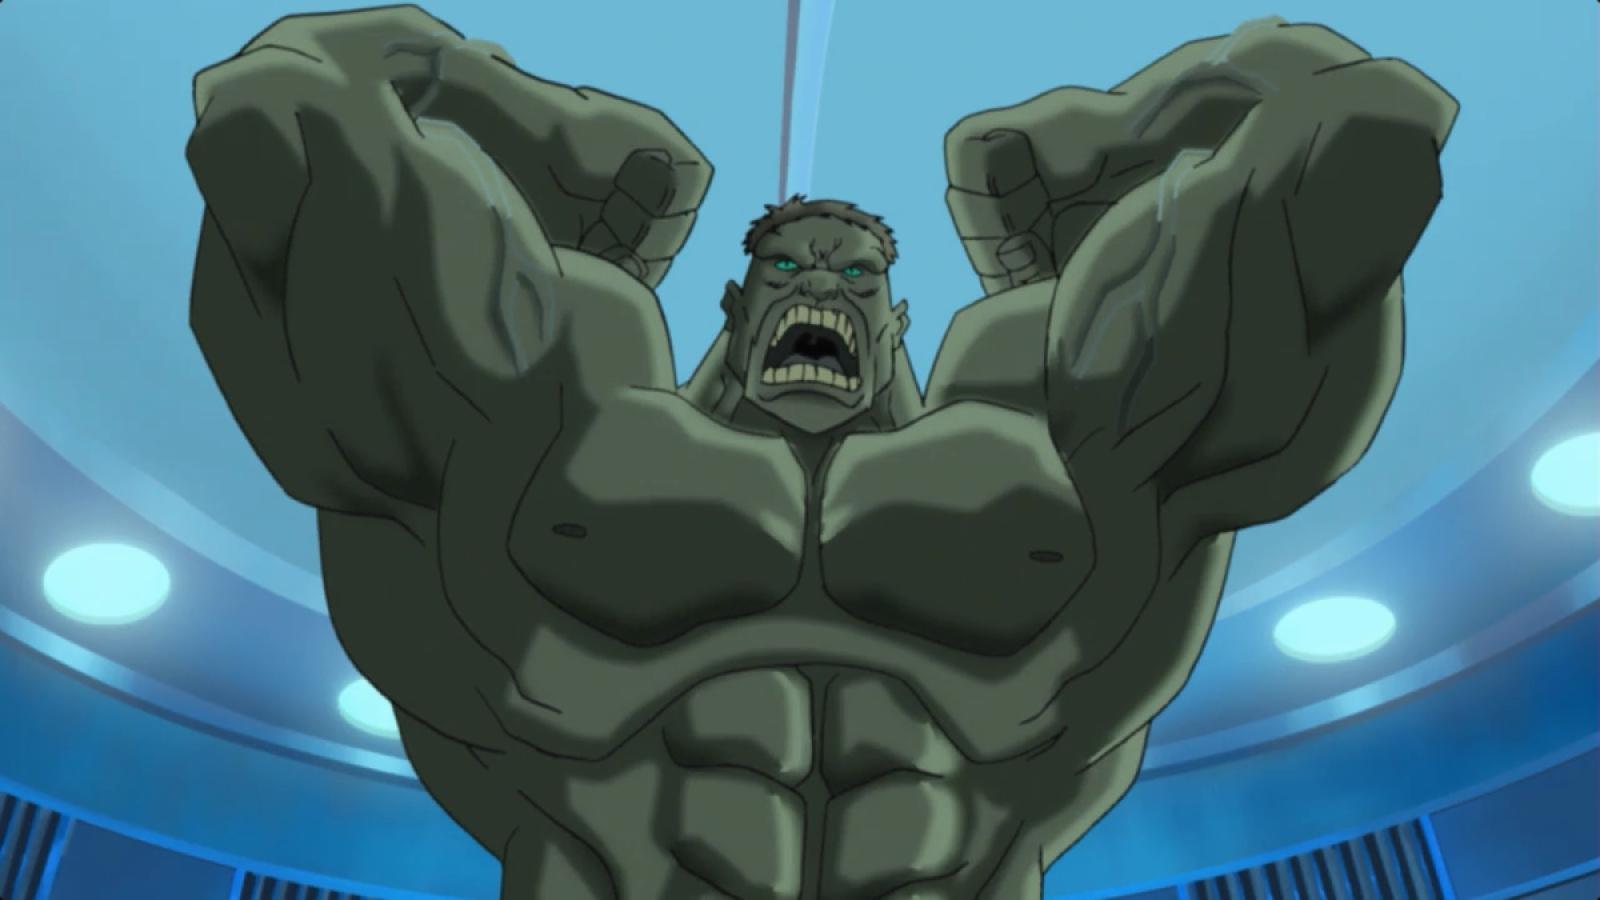 Hulk about to smash in 'Ultimate Avengers'